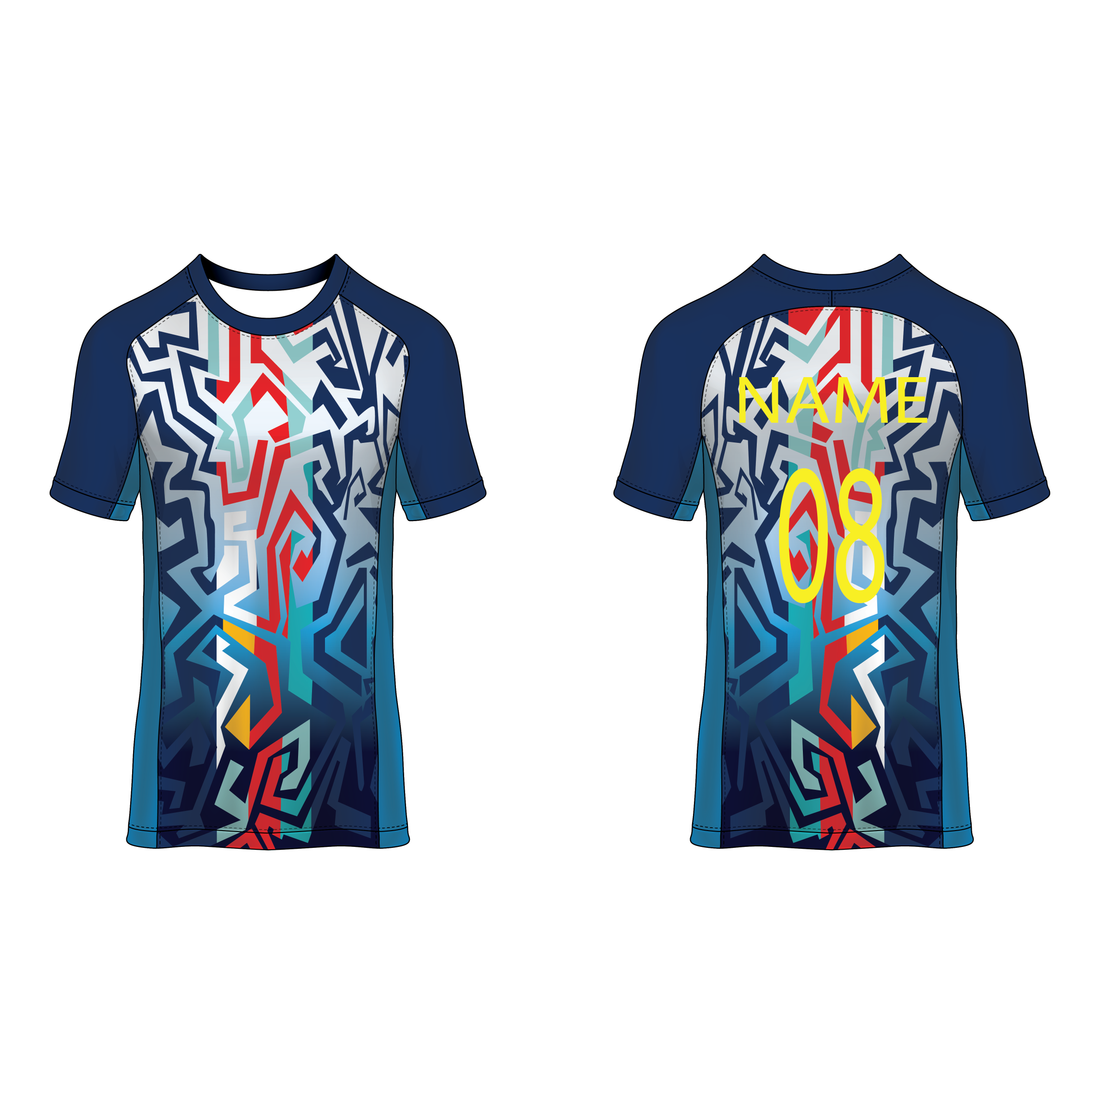 NEXT PRINT All Over Printed Customized Sublimation T-Shirt Unisex Sports Jersey Player Name & Number, Team Name NP50000264